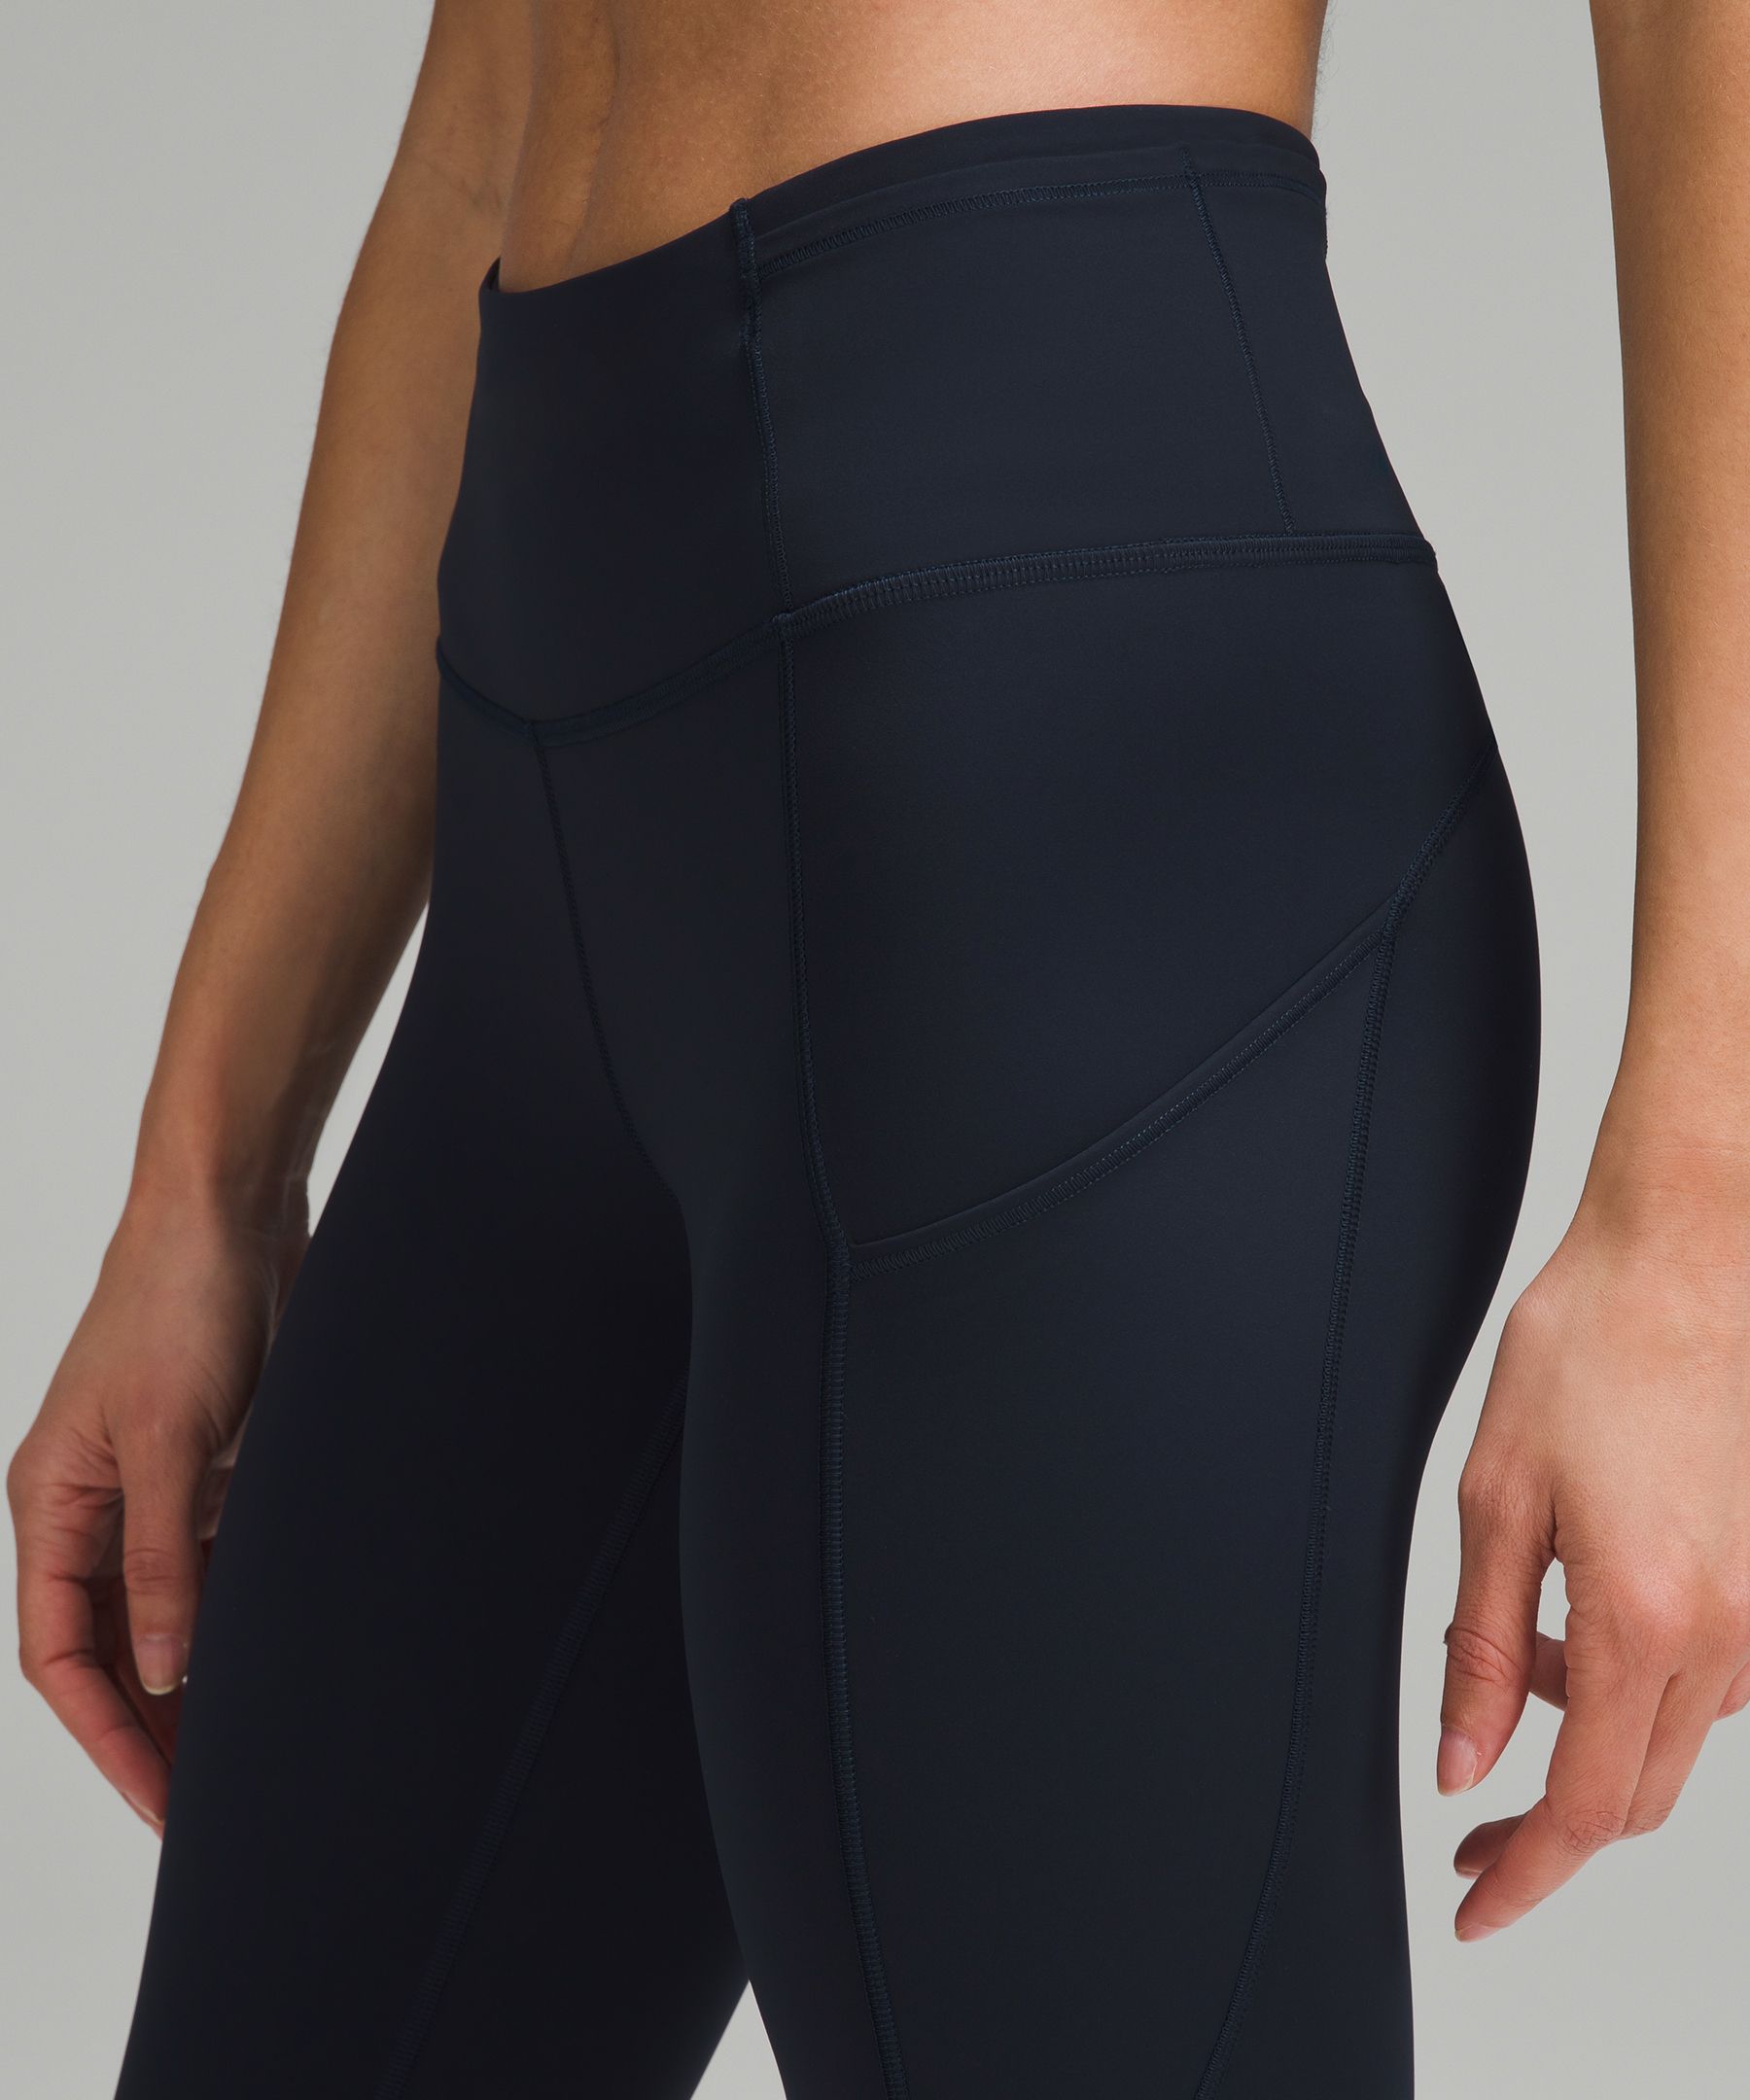 Lululemon Fast & Free 7/8 Tight II Black Leggings Non-Reflective Nulux 25  - $60 - From Haley